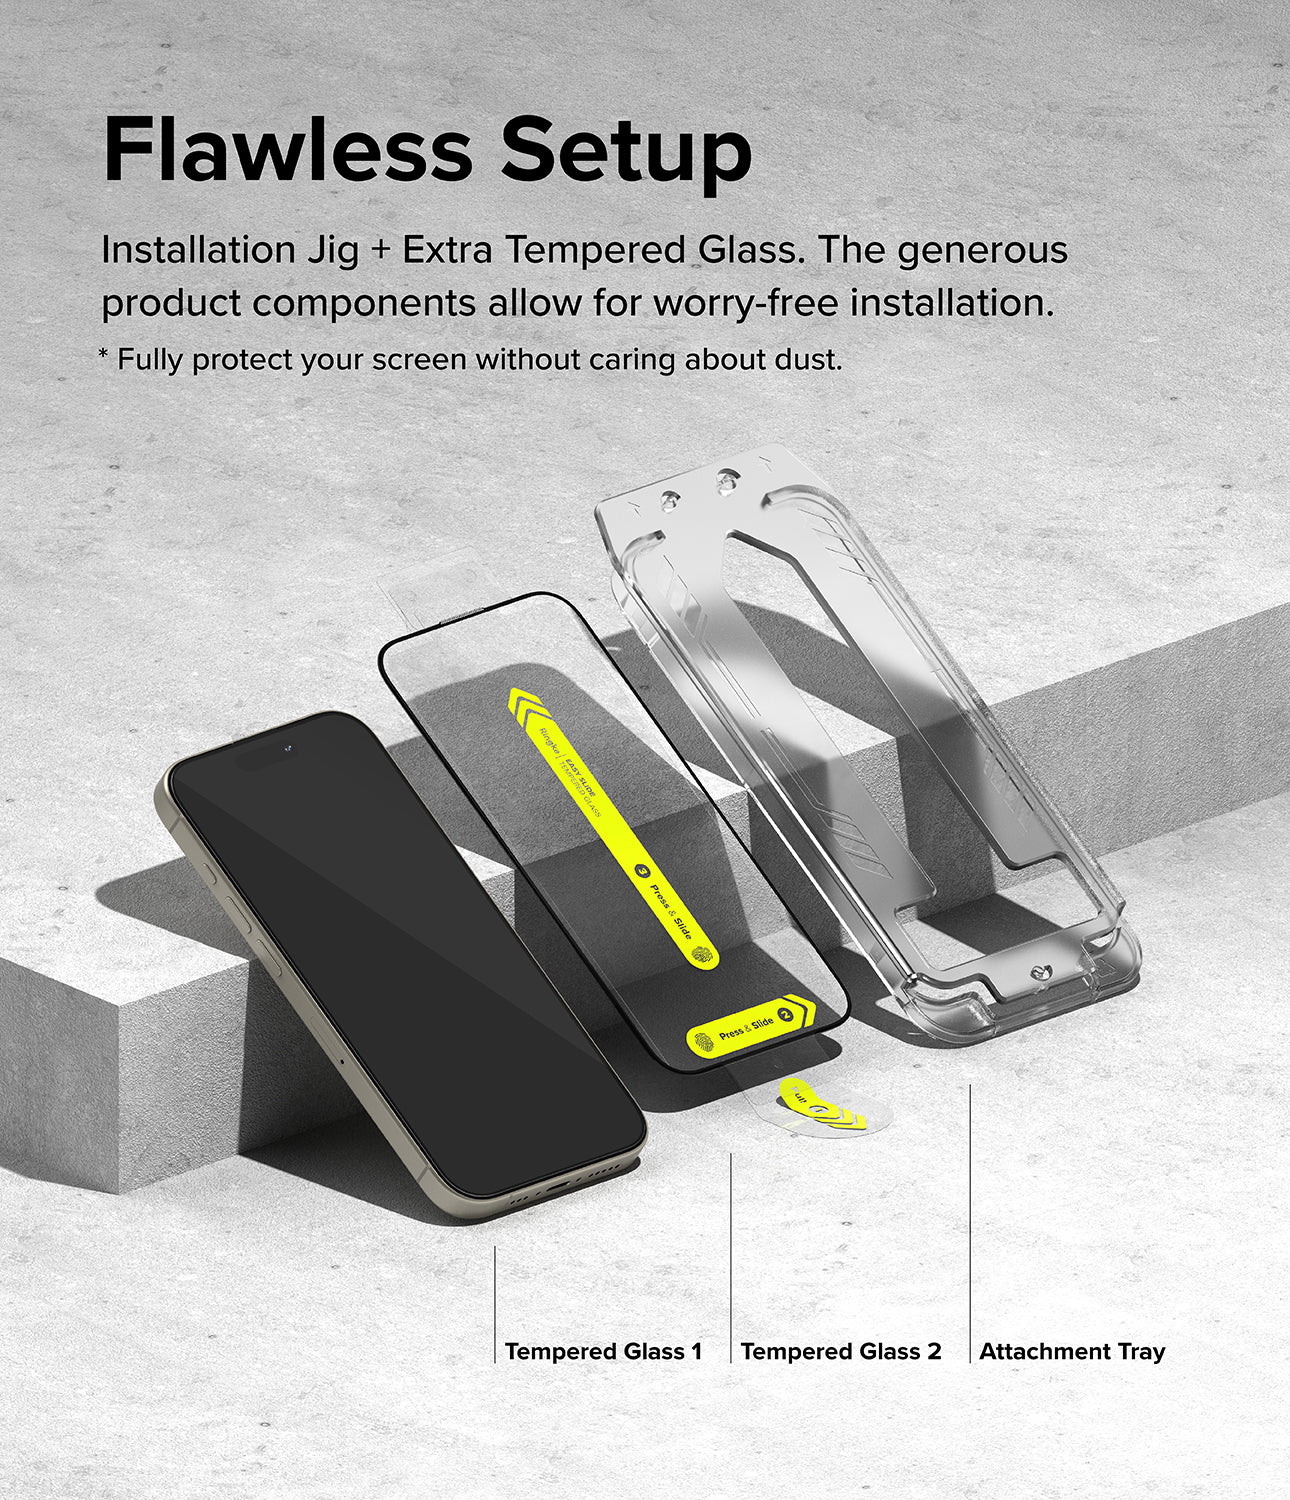 iPhone 15 Pro Screen Protector | Easy Slide Tempered Glass - Flawless Setup. Installation Jig + Extra Tempered Glass. The generous product components allow for worry-free installation.